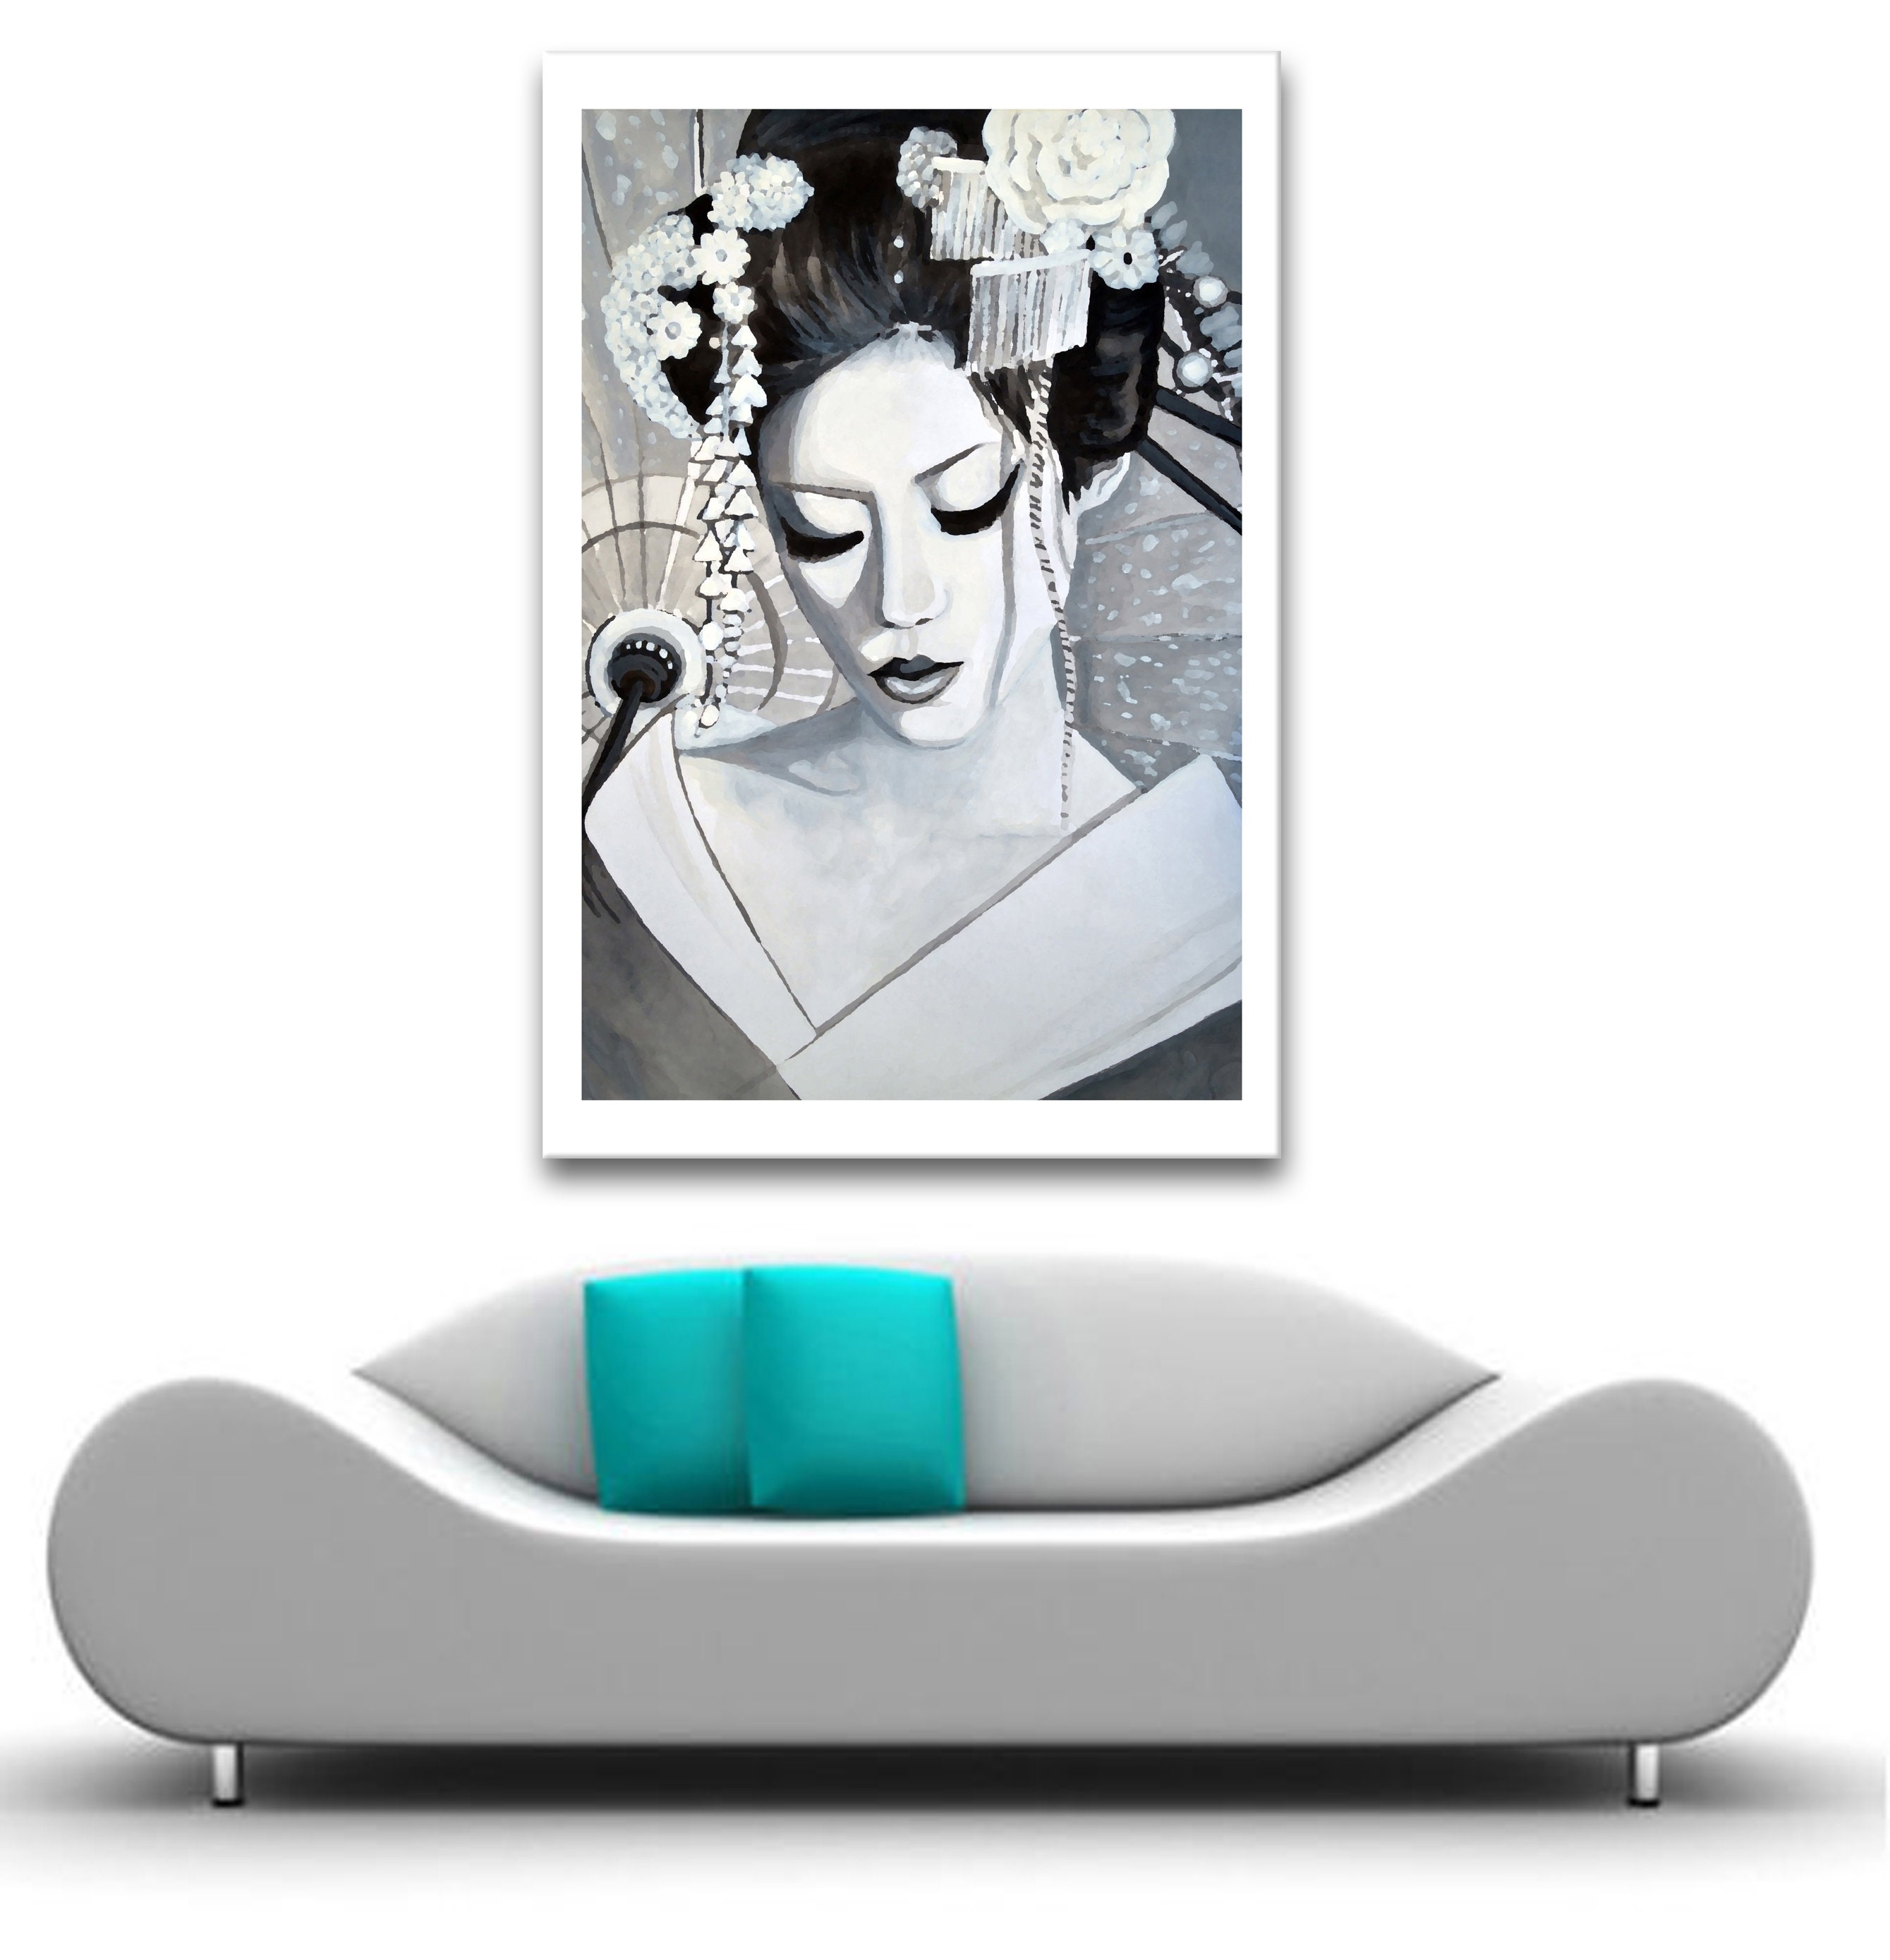 LARGE FRAMED CANVAS WALL ART PRINT JAPANESE PAINTING WHITE GREY GEISHA PICTURE 